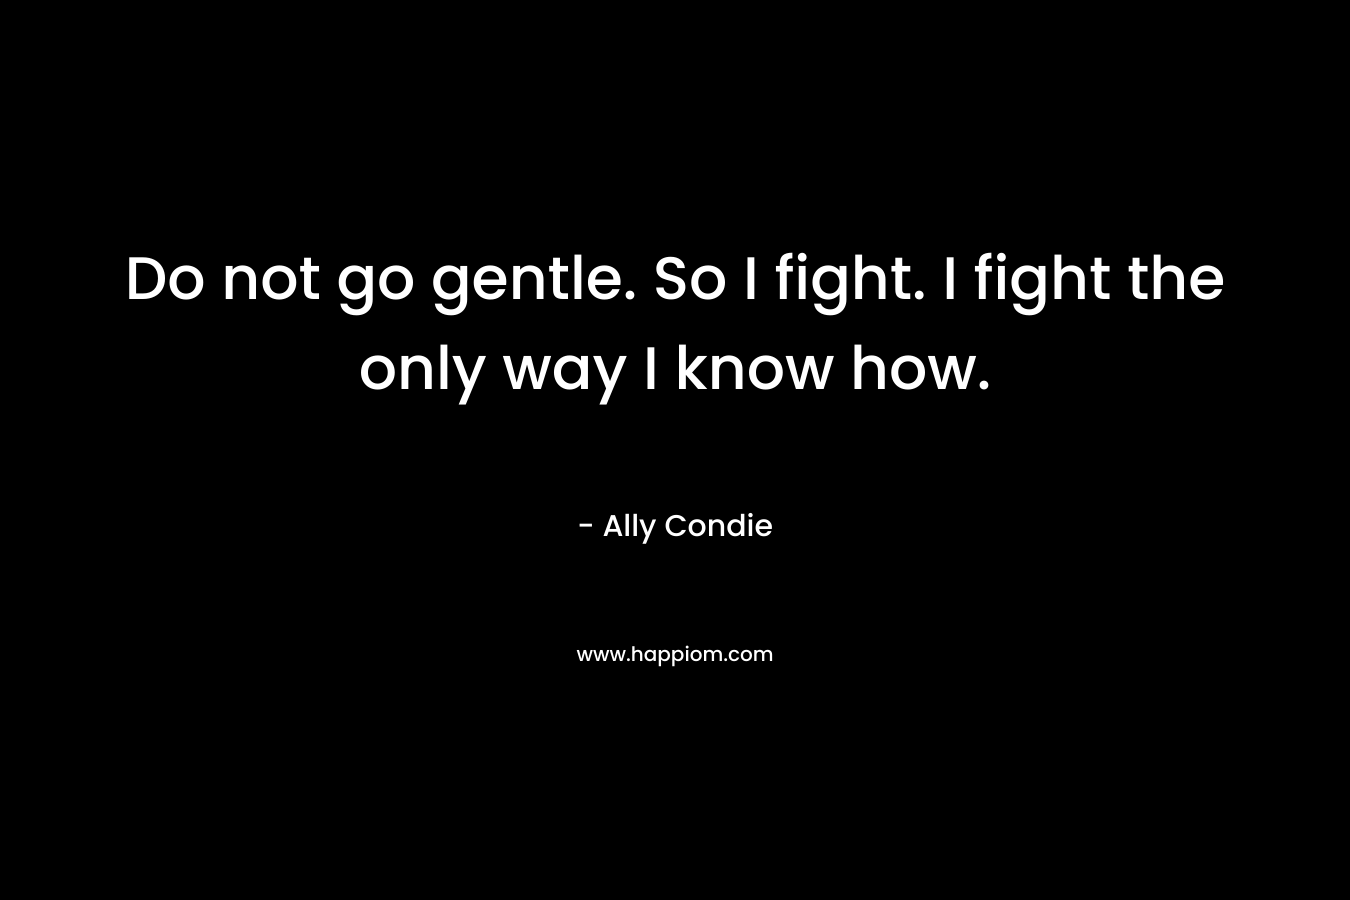 Do not go gentle. So I fight. I fight the only way I know how.